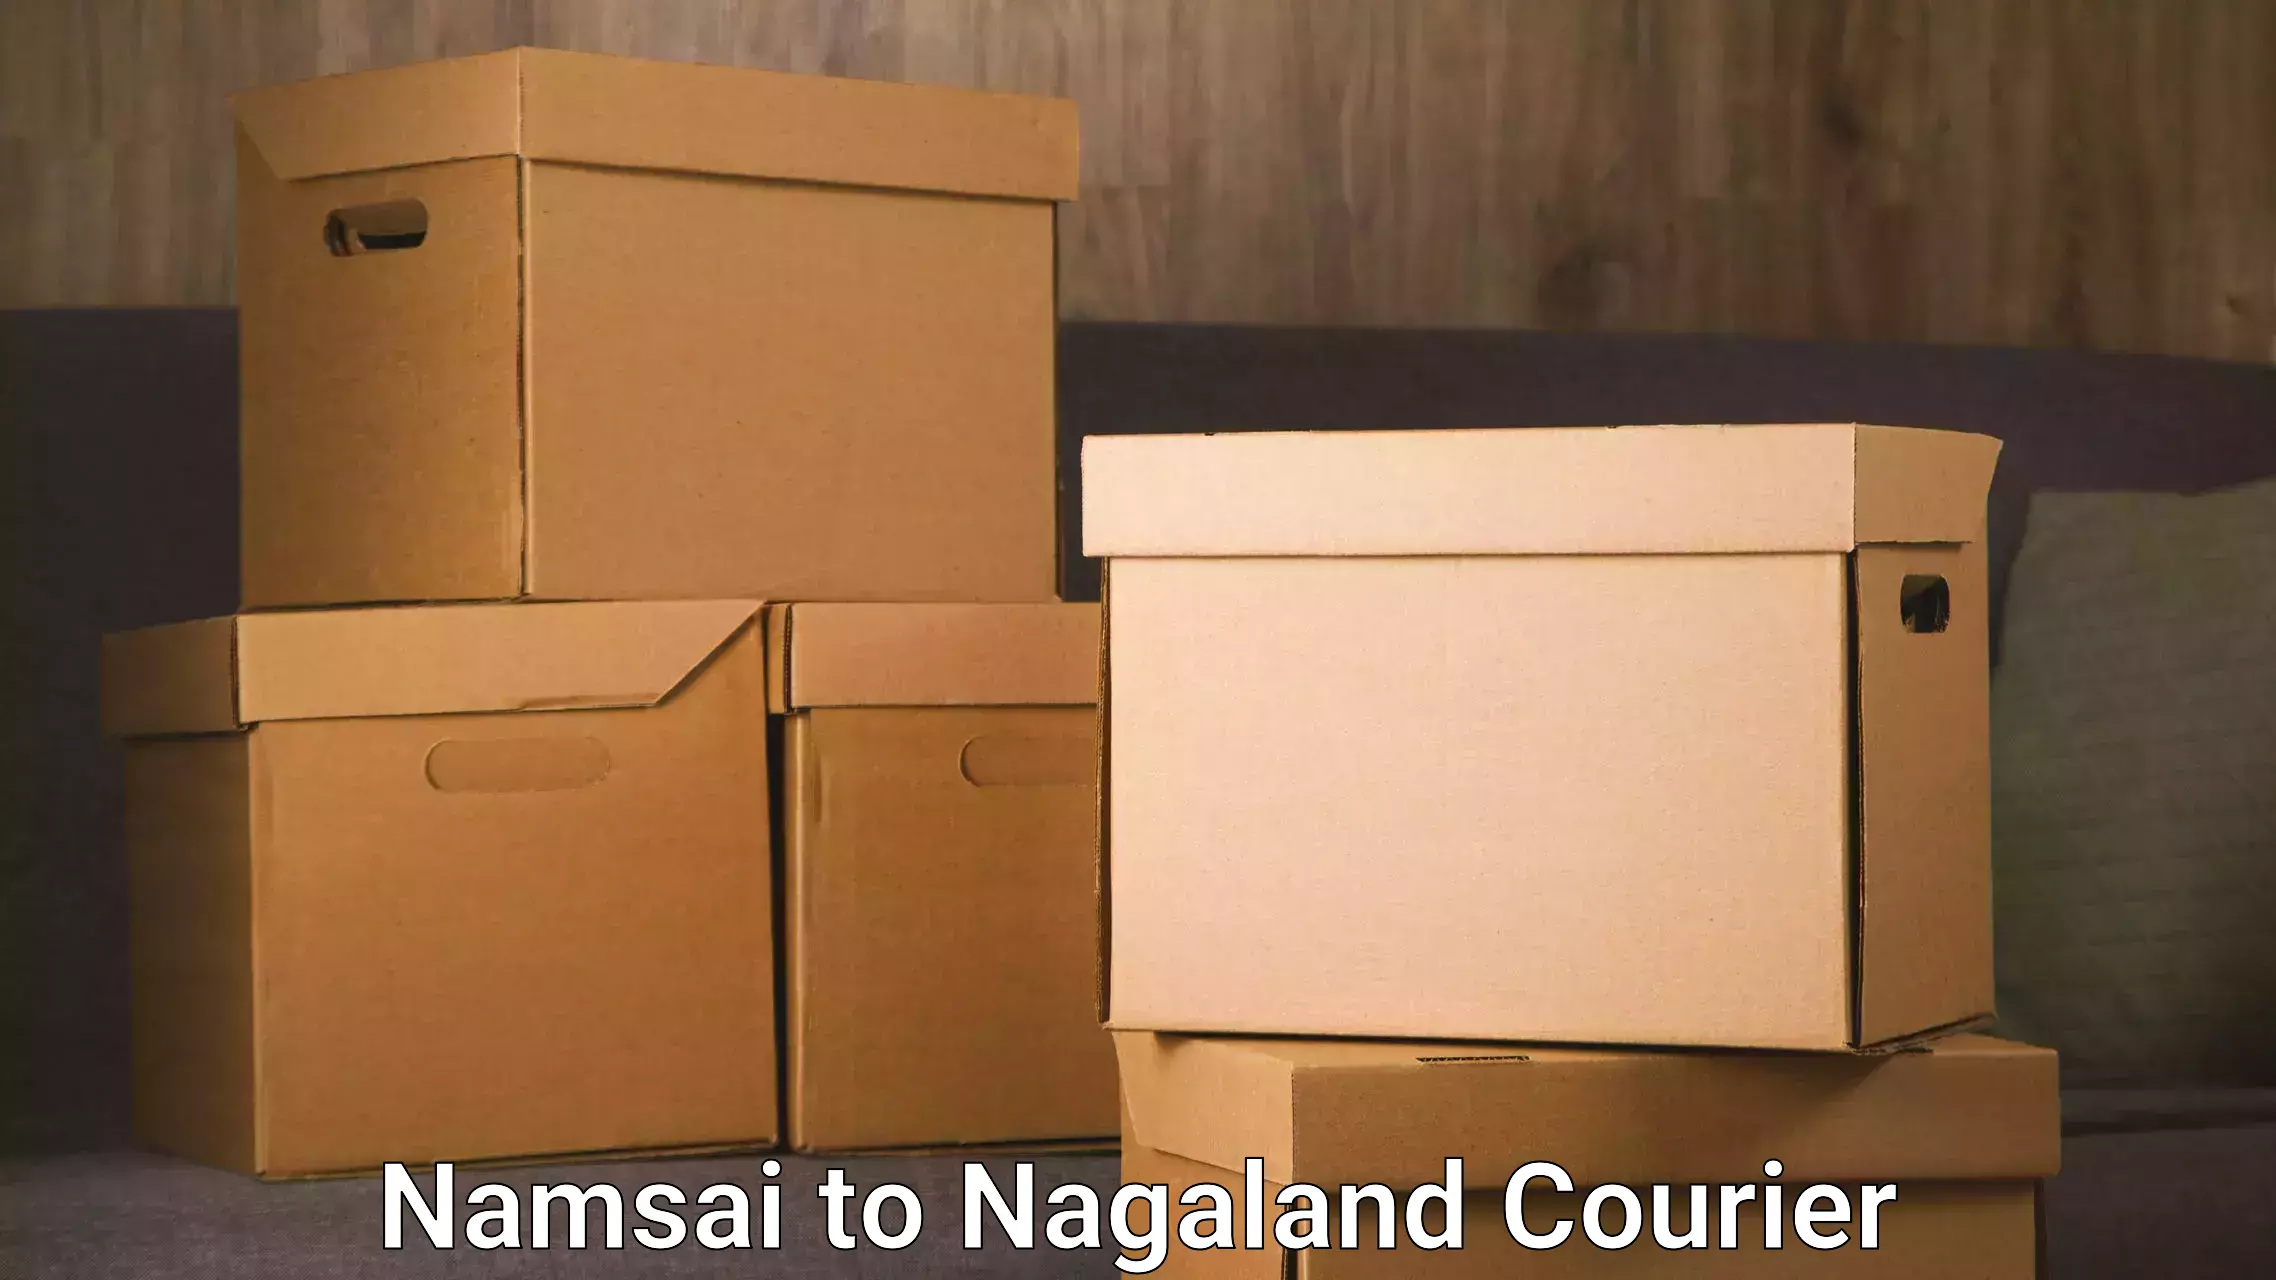 Cash on delivery service Namsai to Nagaland